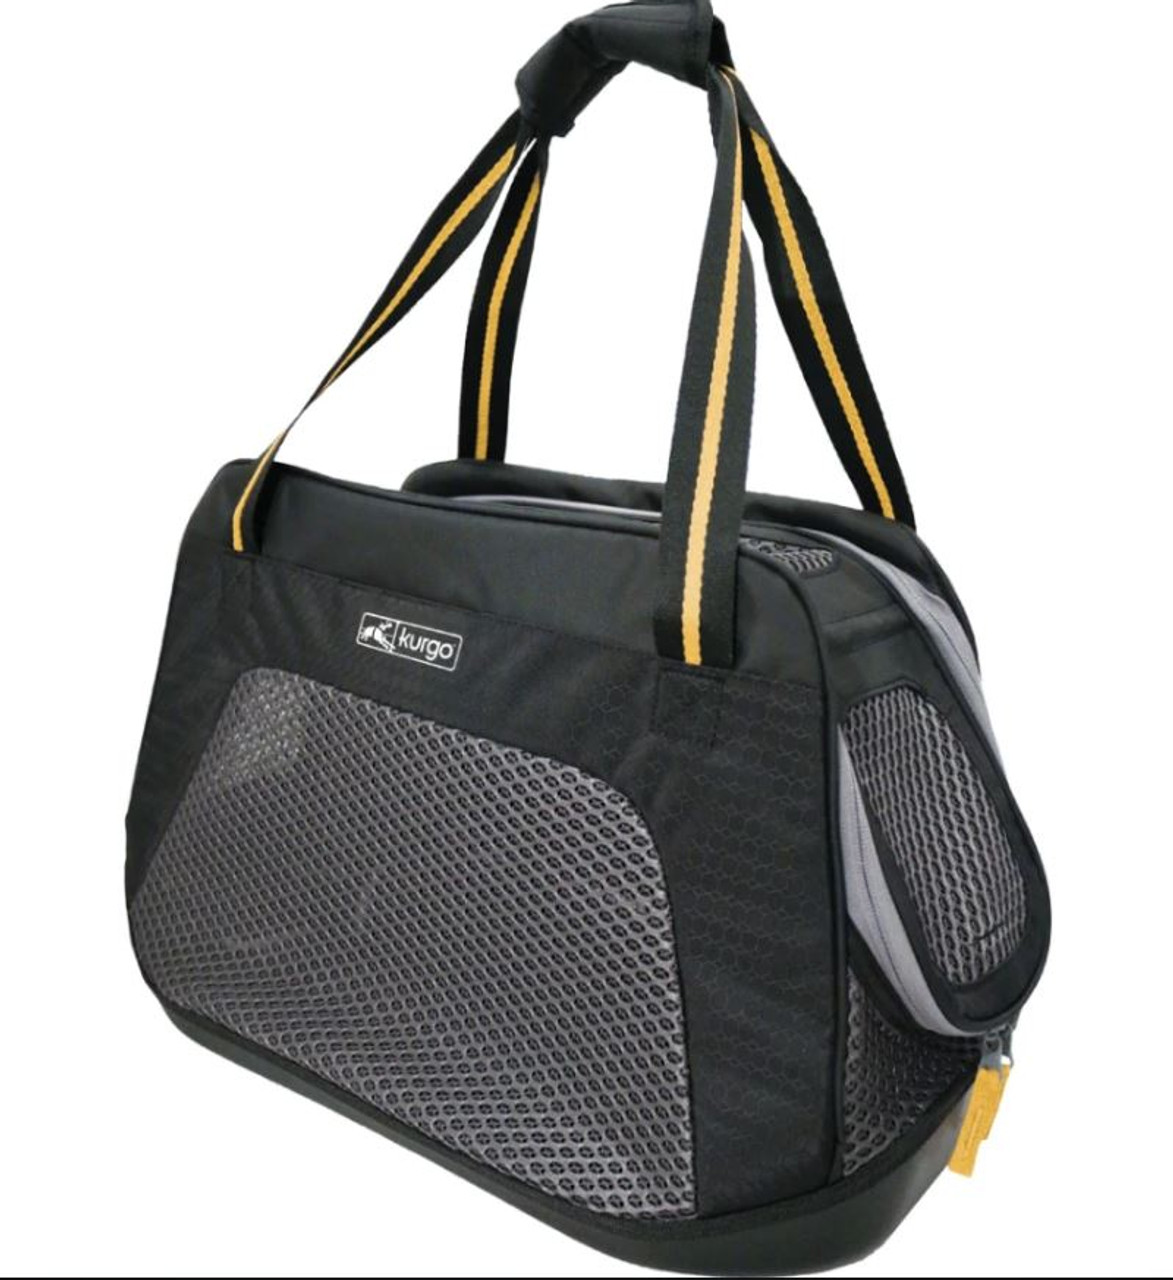 Explore the Pet Carrier Collection